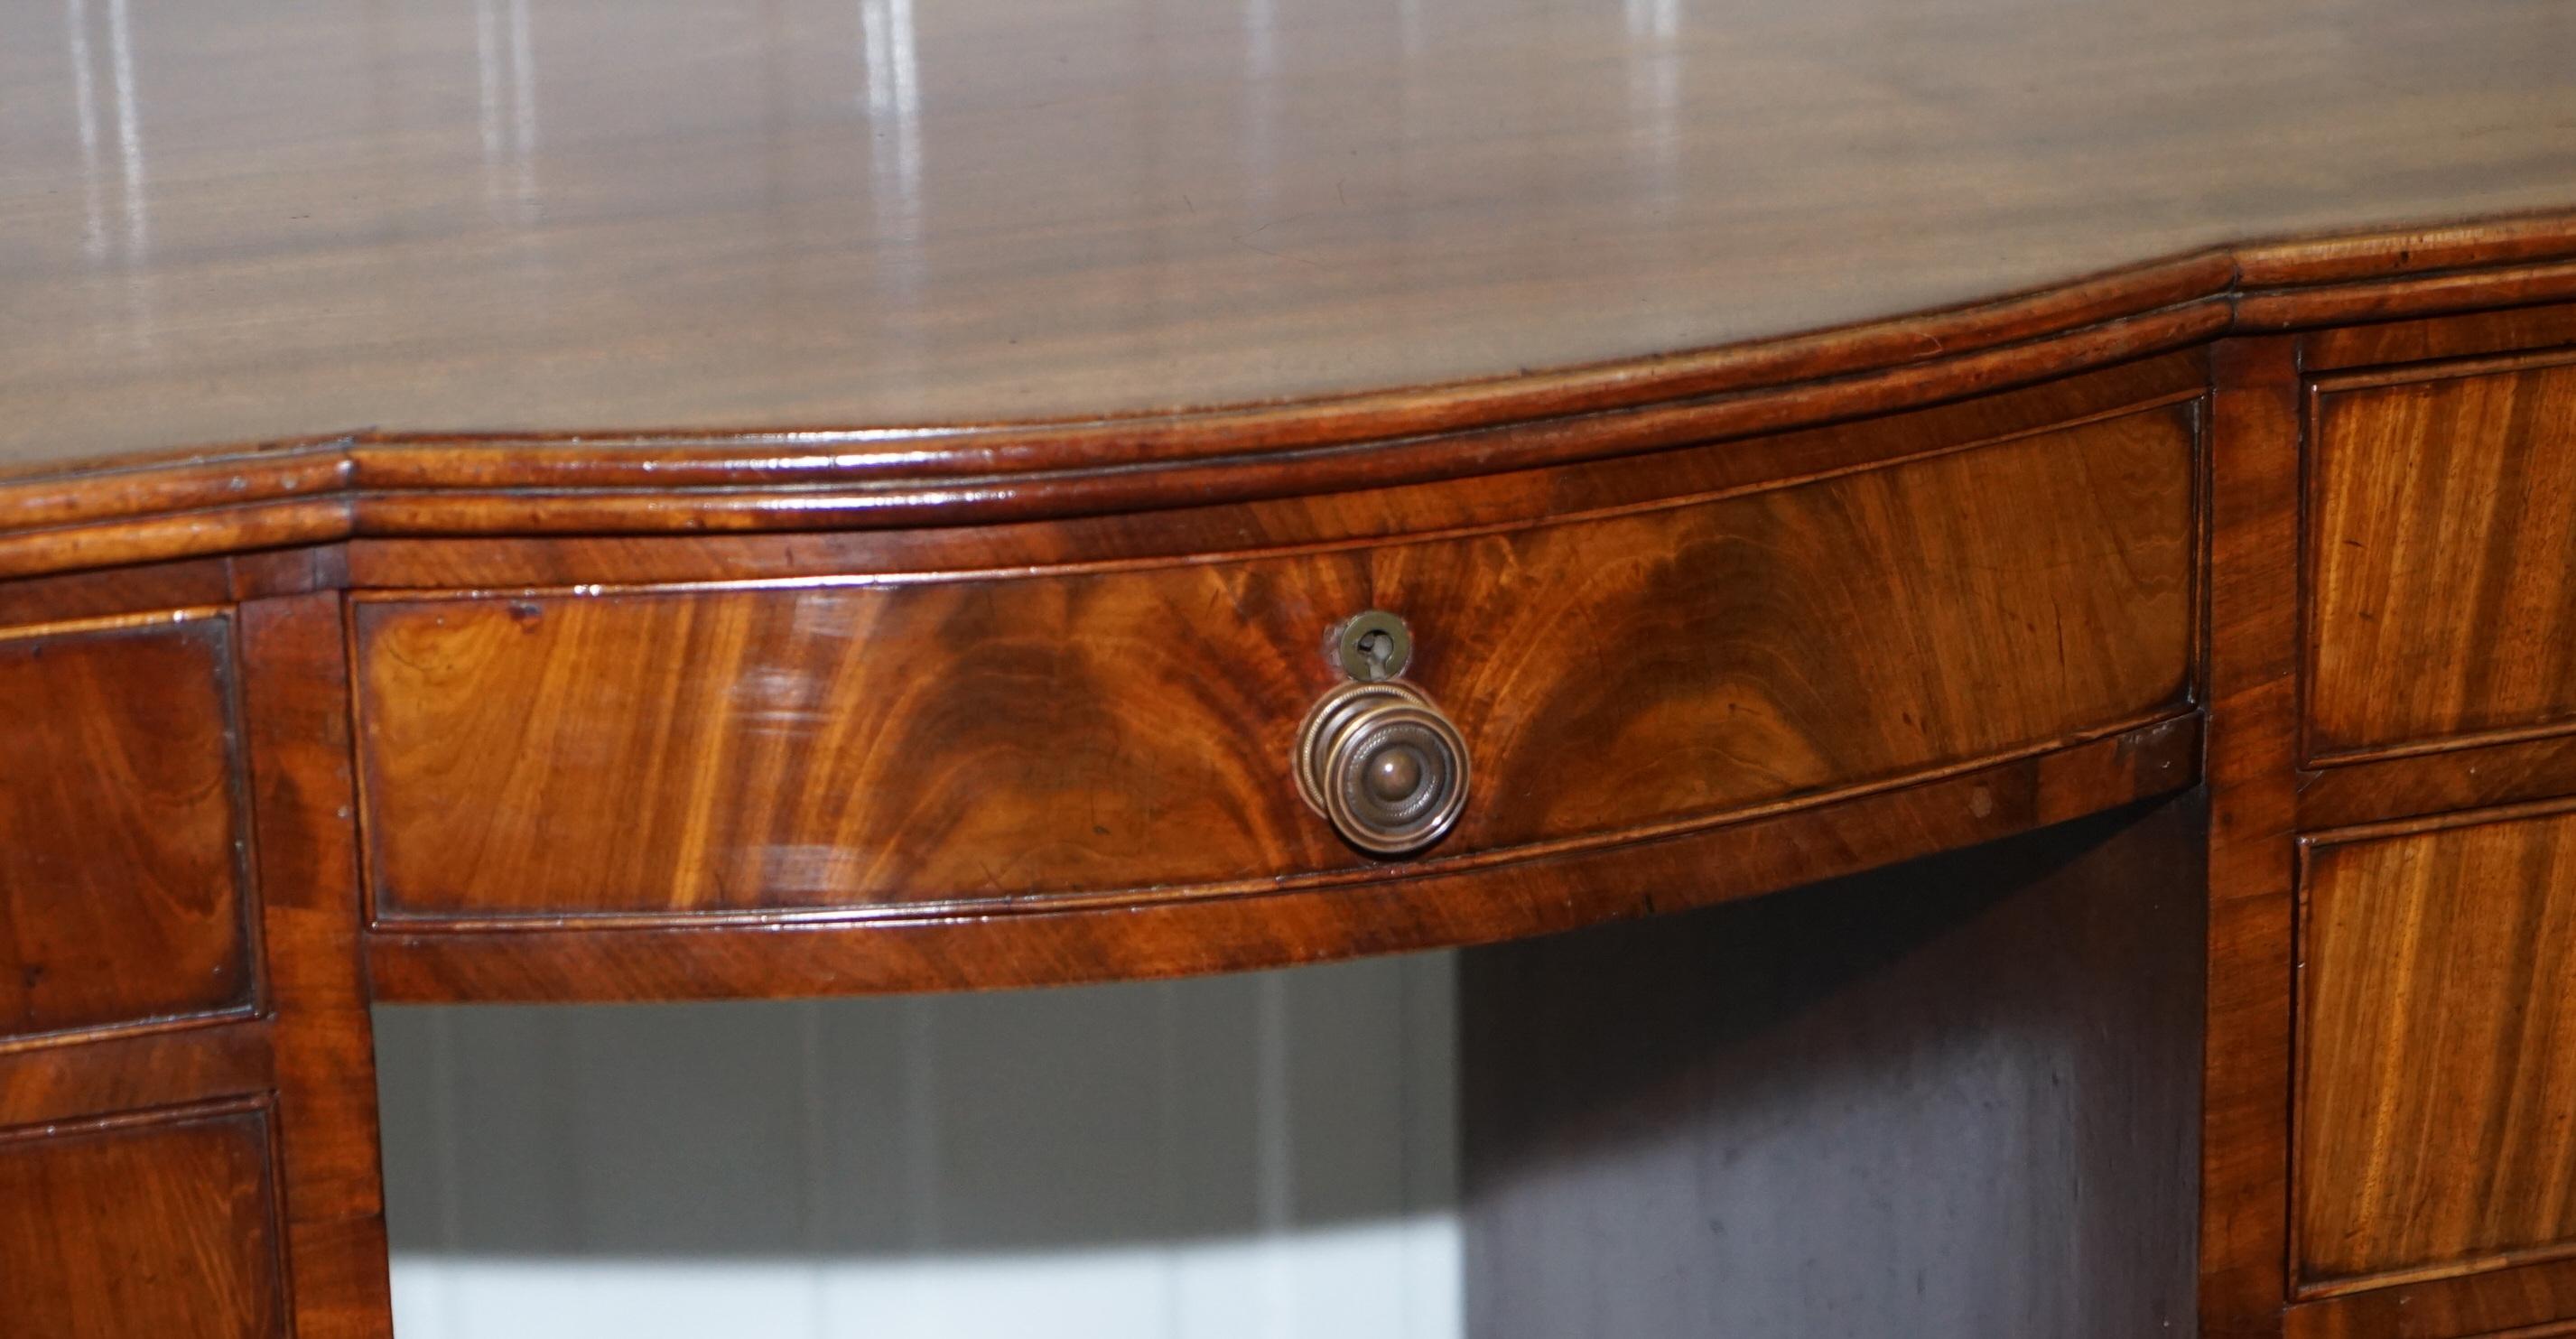 Exquisite Regency Period 1815 Hardwood Kneehole Desk with Lion Hairy Paw Feet For Sale 3